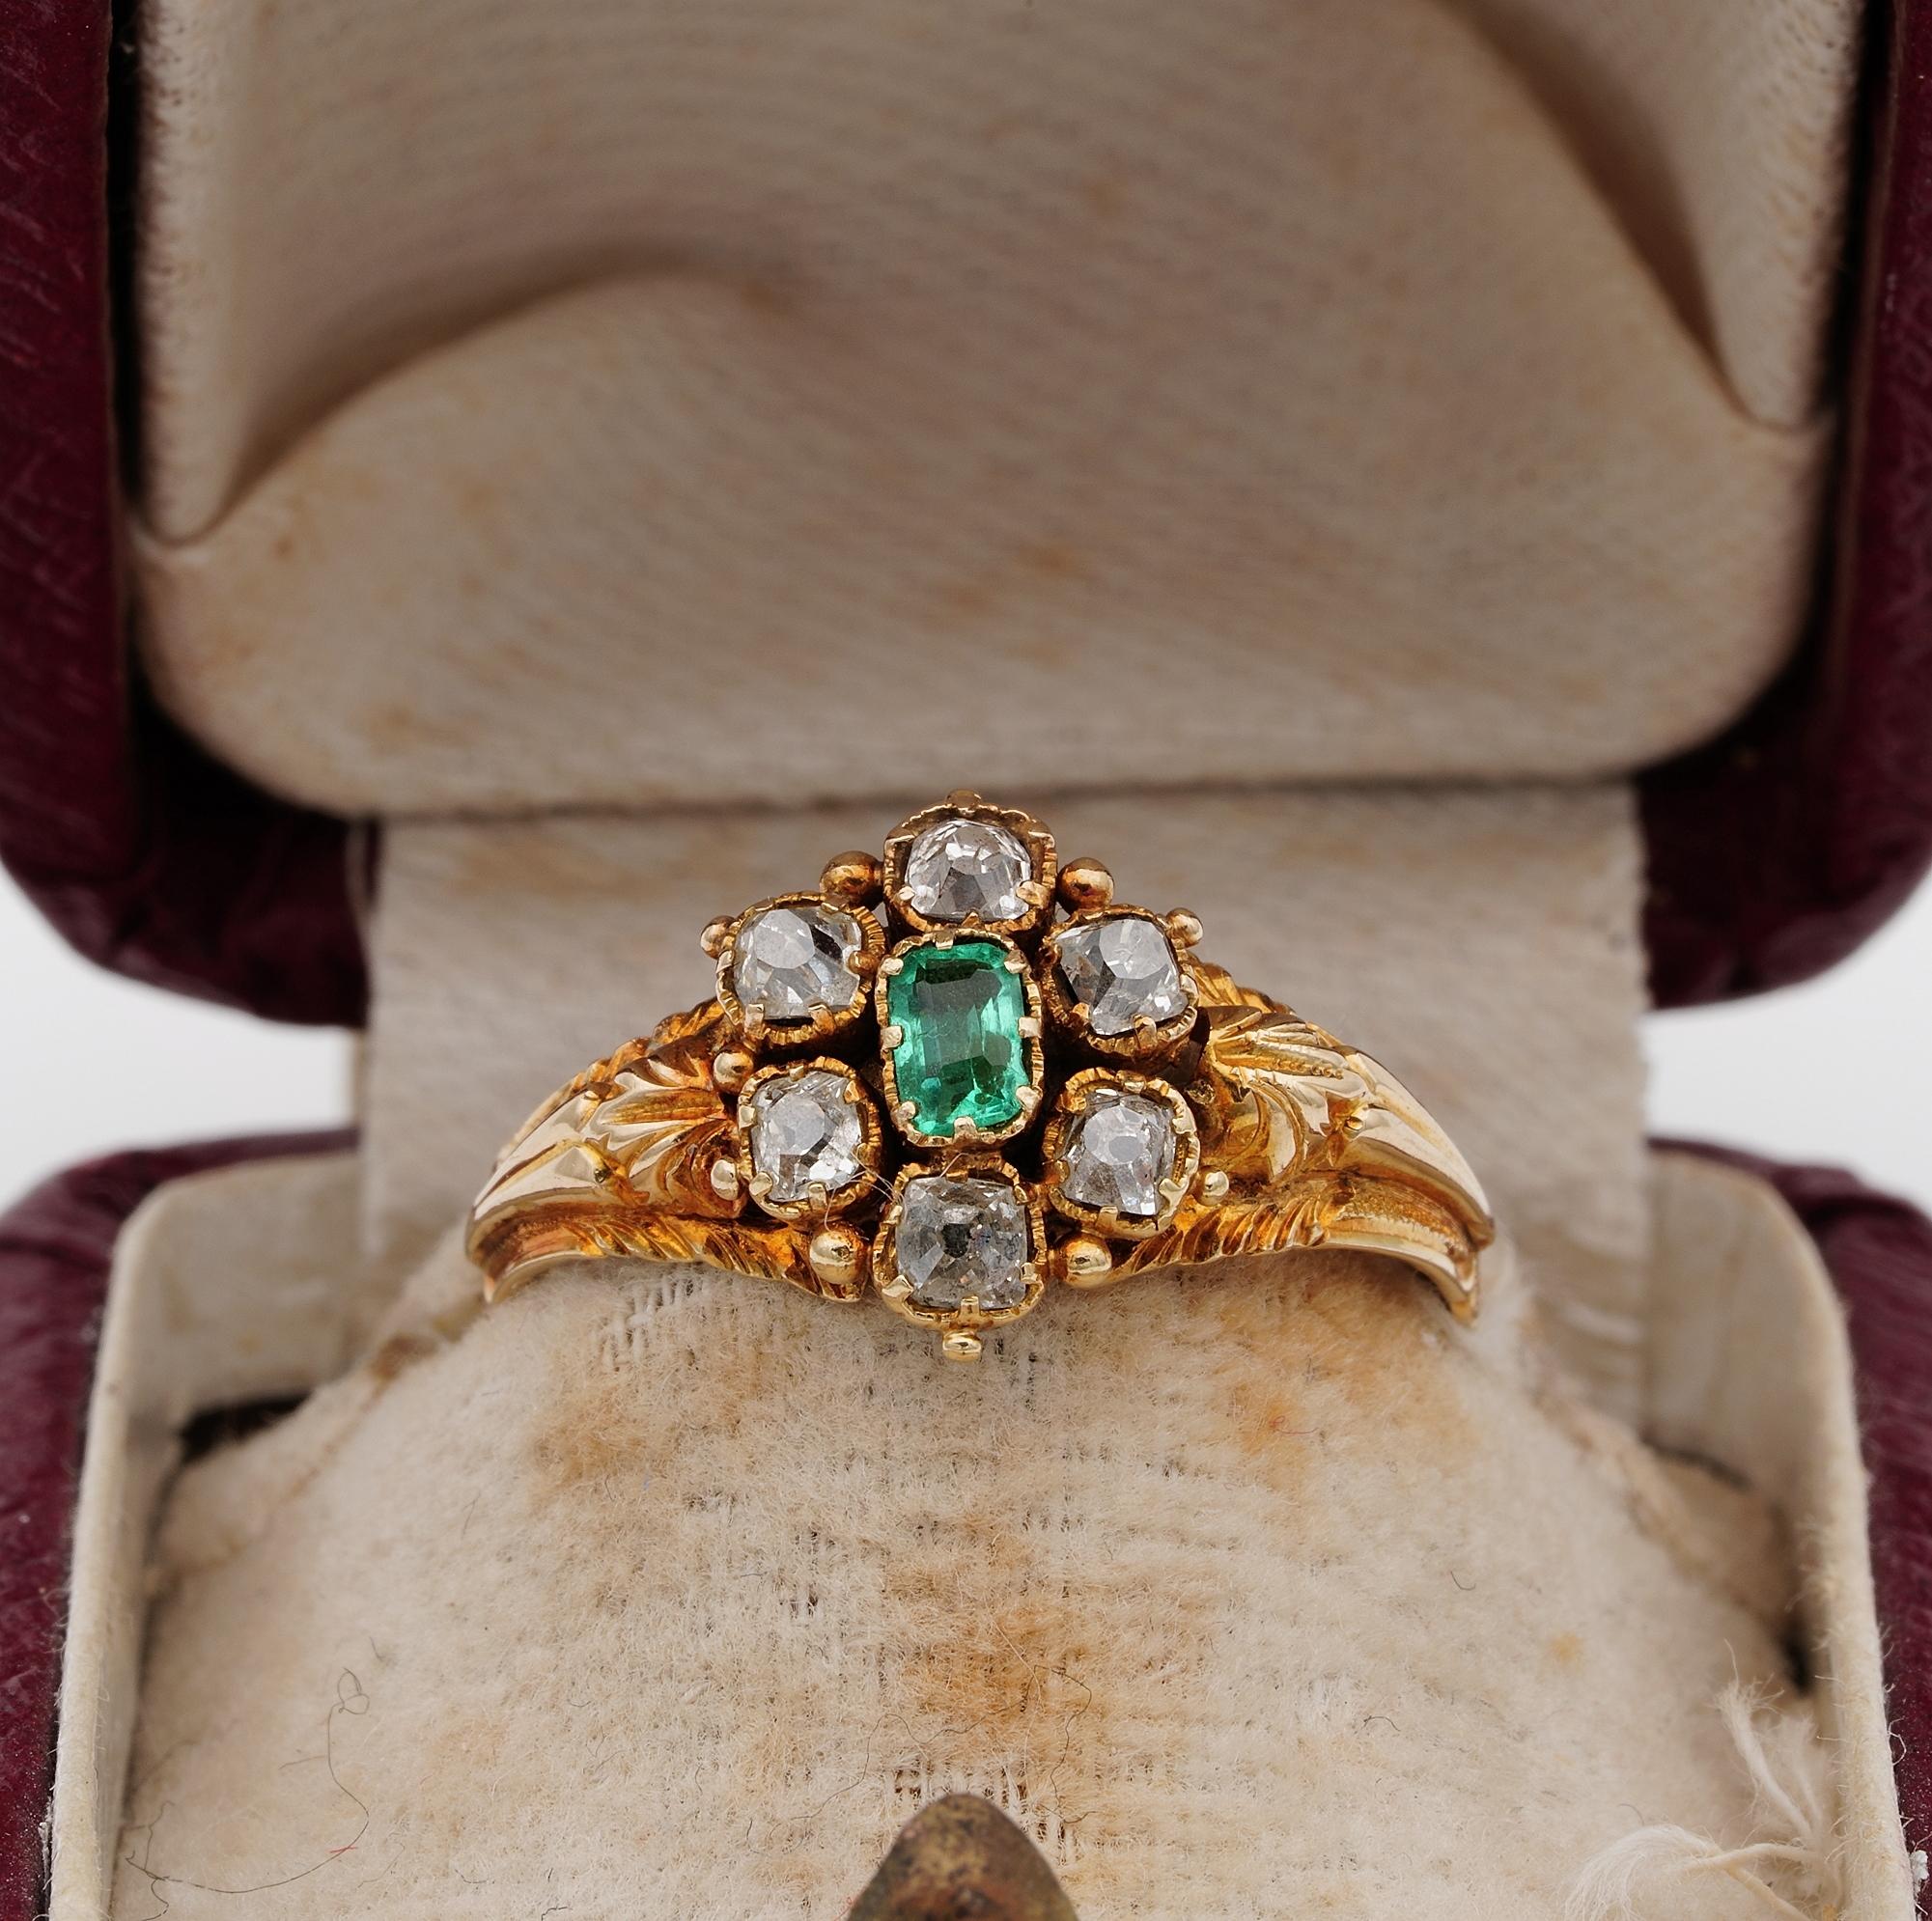 Adorable Georgian Little Treasure

Georgian period exquisitely daisy design 1780/1800 ca

Beautifully detailed with fine carving, still sharp, enriching the mounting embracing the centre daisy cluster of Emerald and Diamonds

Approx .15 Ct the